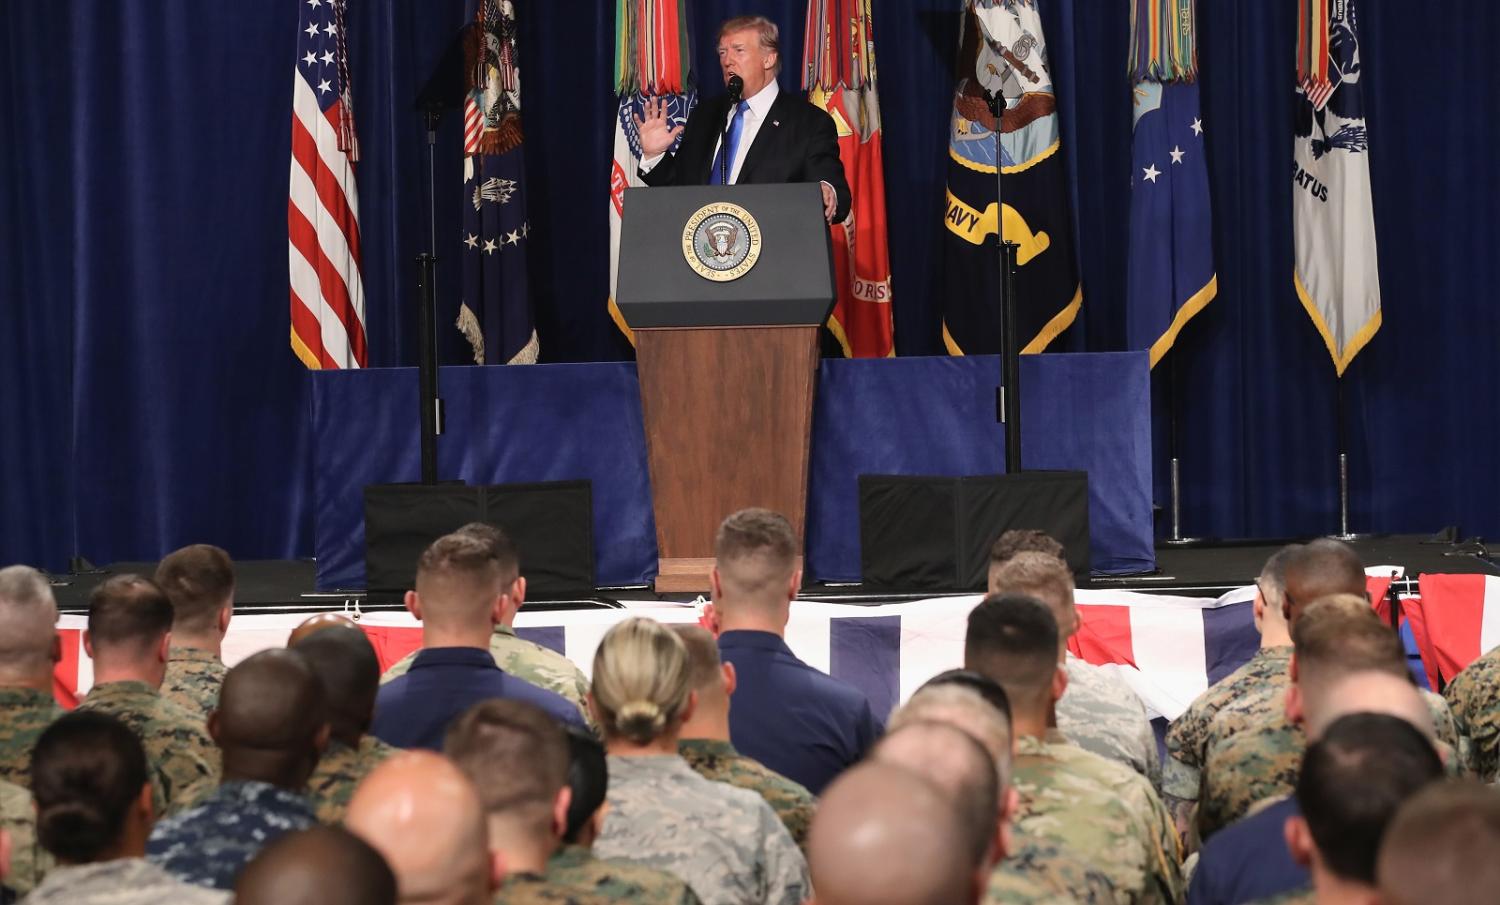 President Trump speaks on America's military involvement in Afghanistan at the Fort Myer base in Arlington, Virginia. (Photo: Mark Wilson/Getty Images)